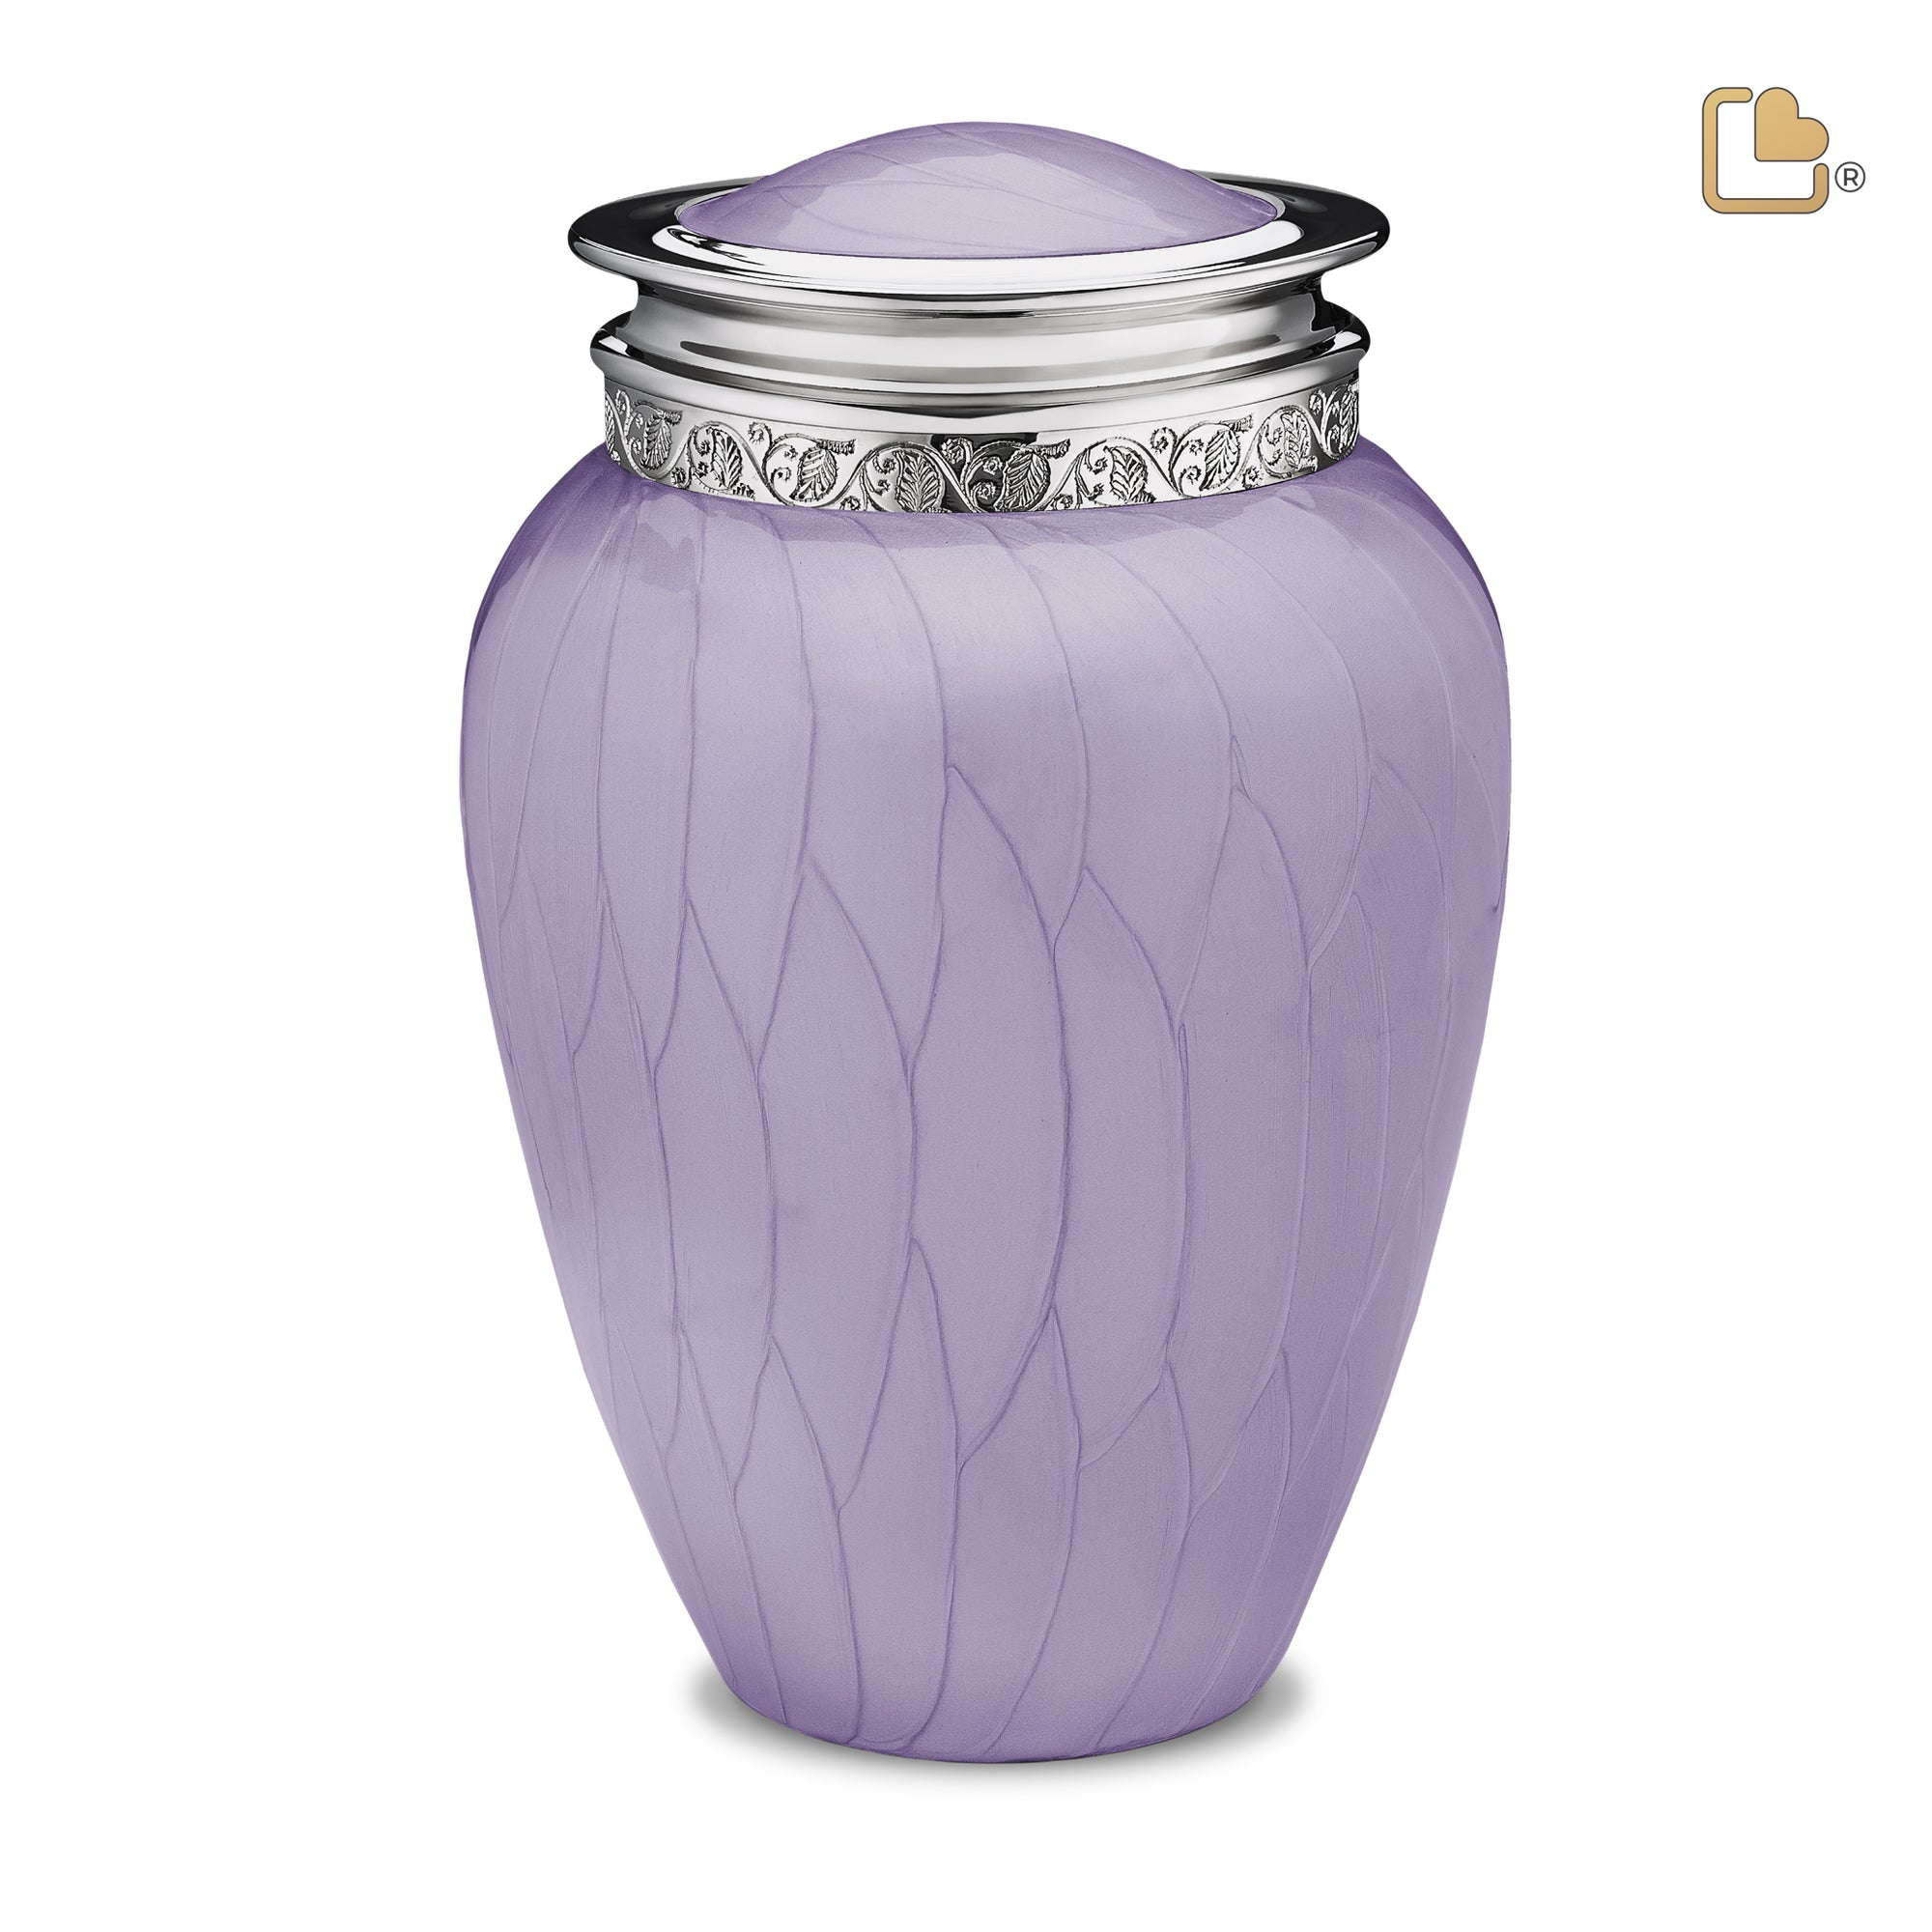 A298   Blessing Standard Adult Urn Pearl Lavender & Pol Silver